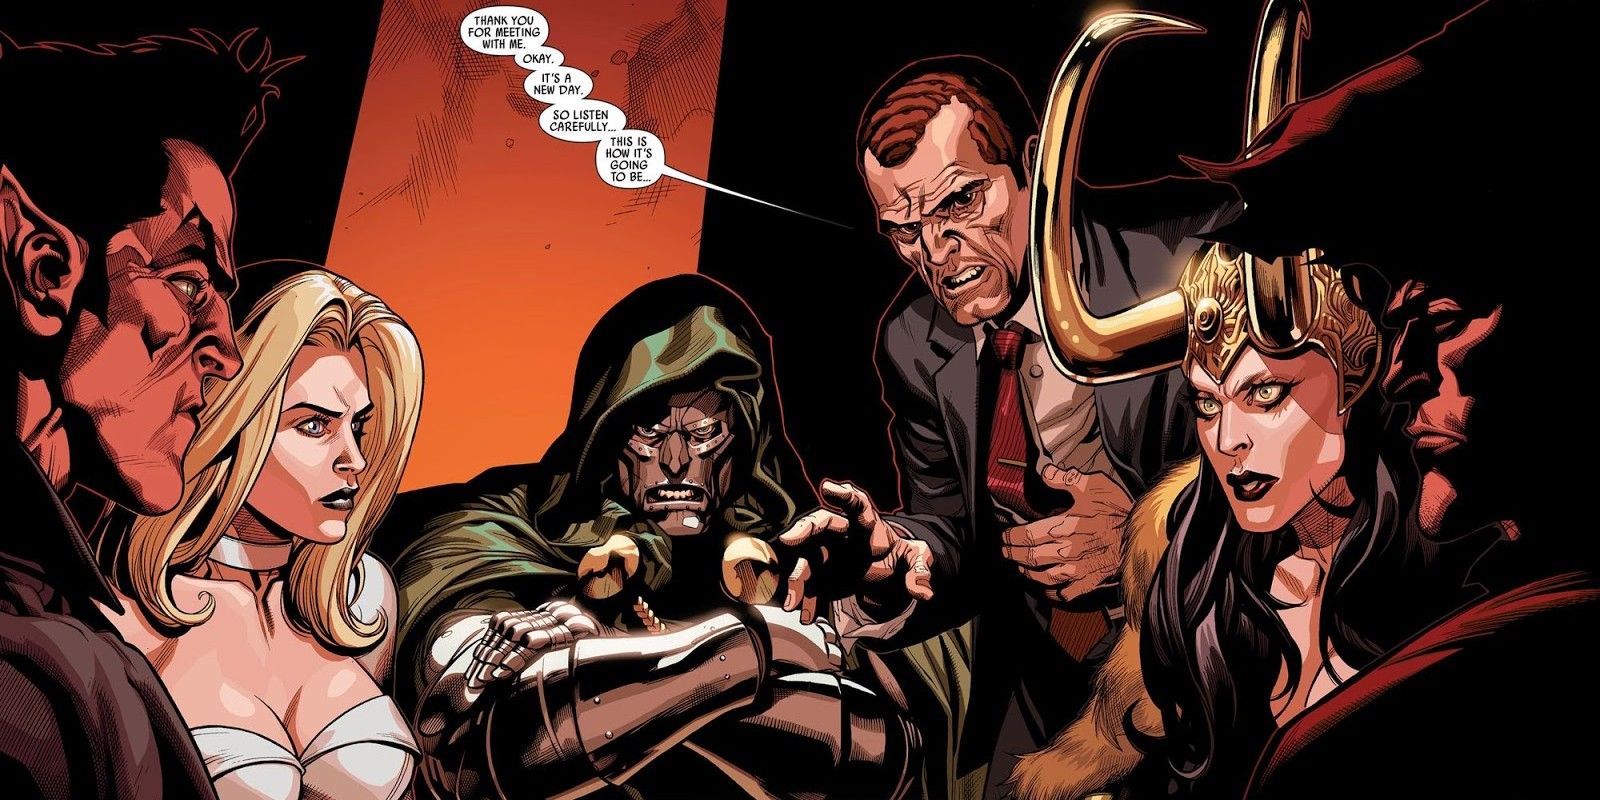 Norman Osborn gathers his Cabal (Namor, Emma Frost, Doctor Doom, Lady Loki, and the Hood) in Marvel's Dark Reign